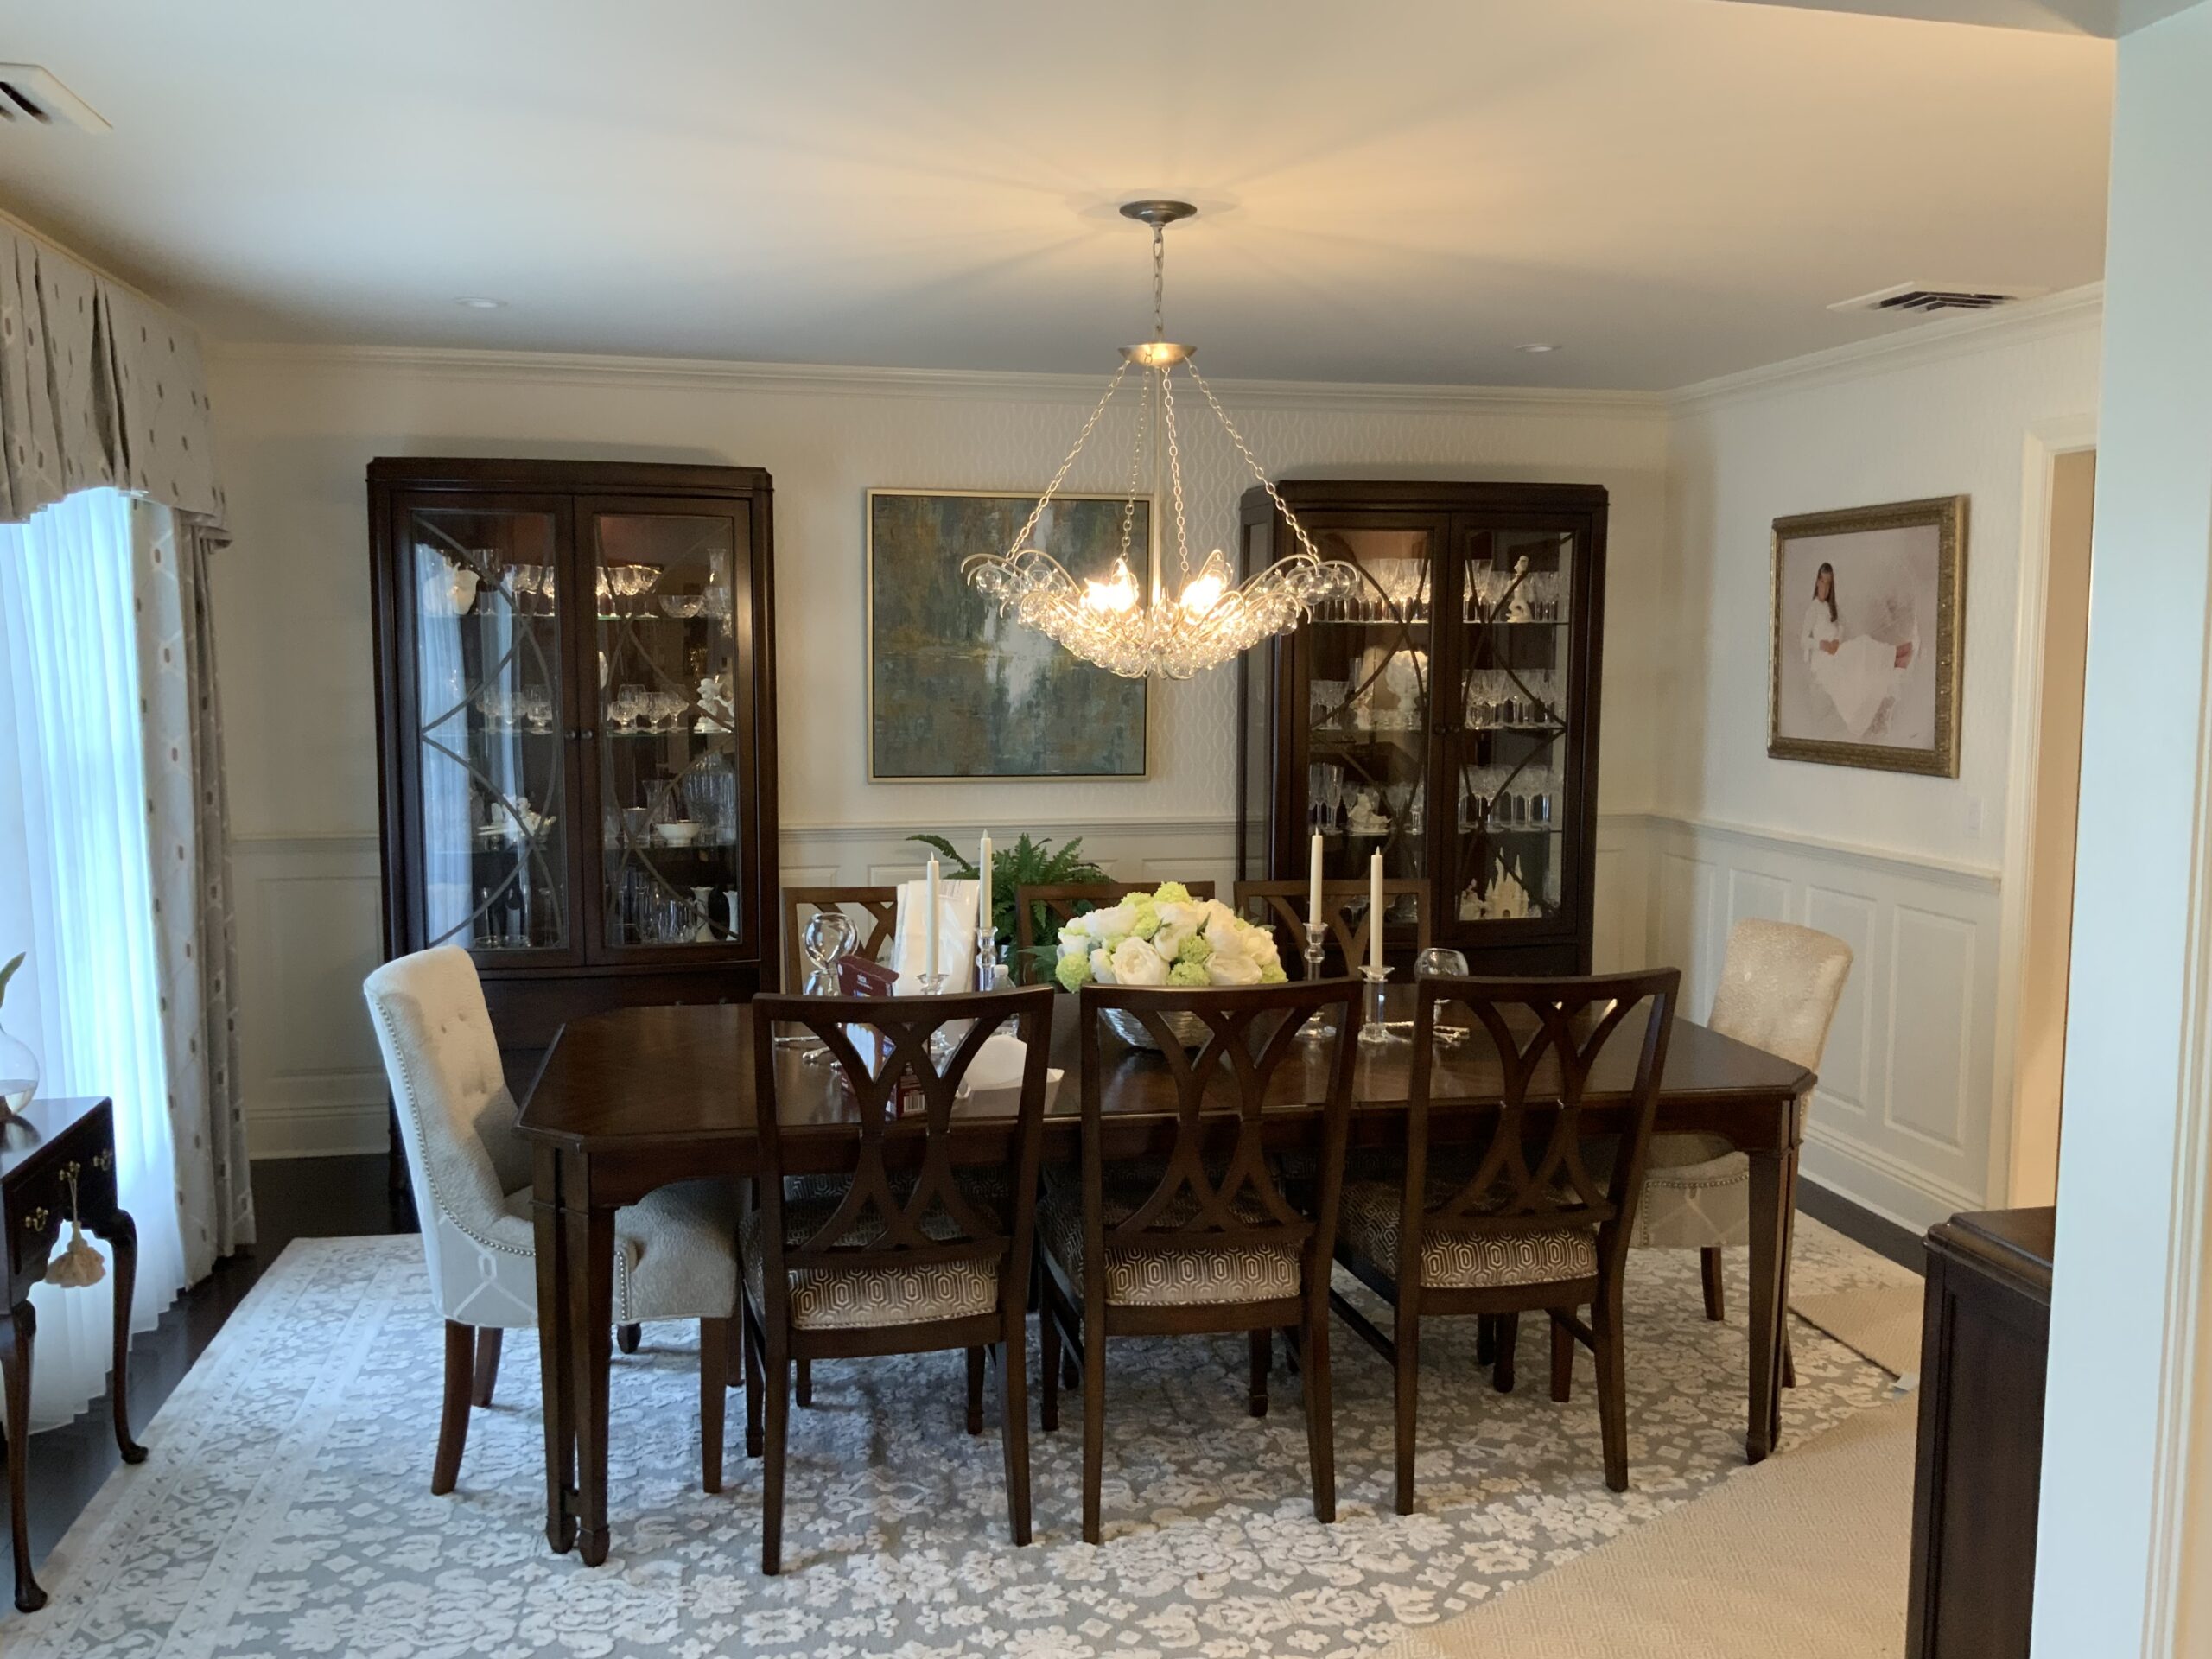 a dinning room table with chairs and a chandelier